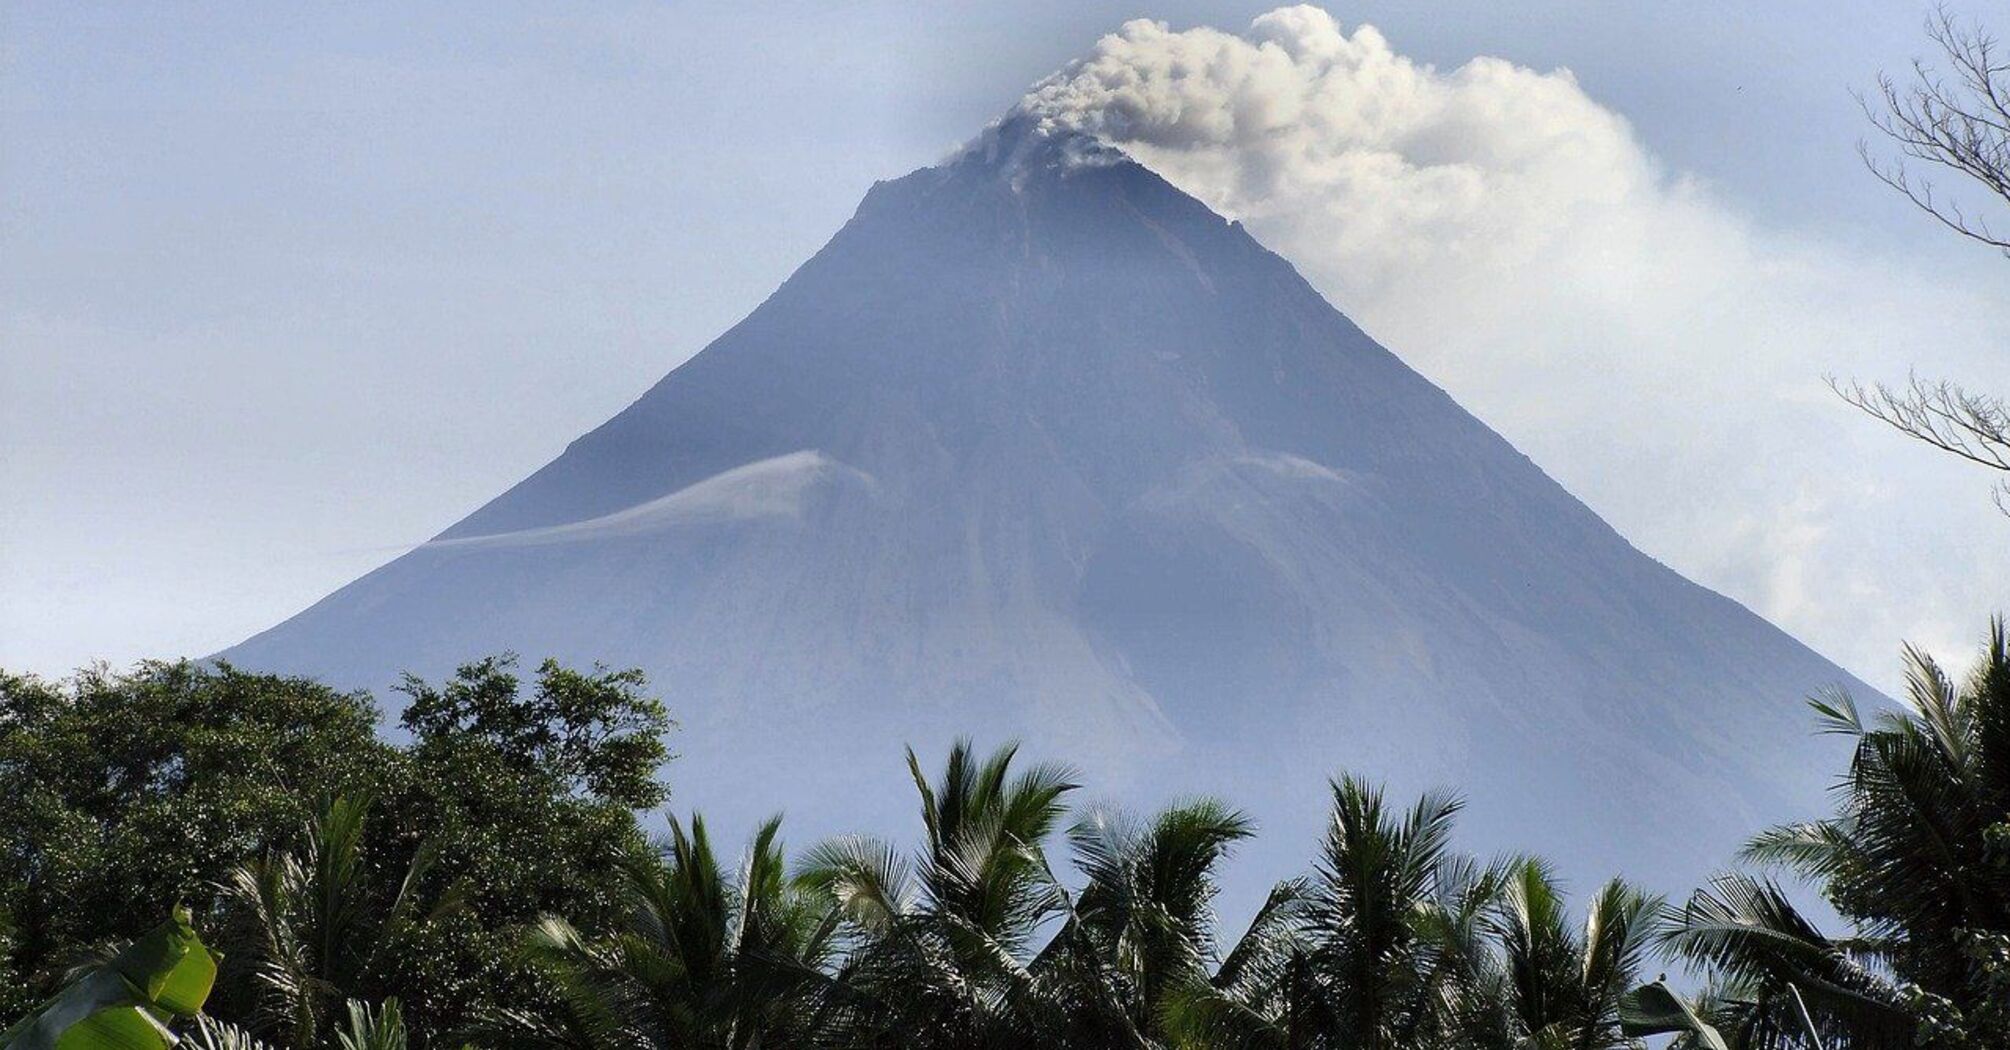 The eruption of Mount Merapi in Indonesia has led to the evacuation of thousands of people. Video